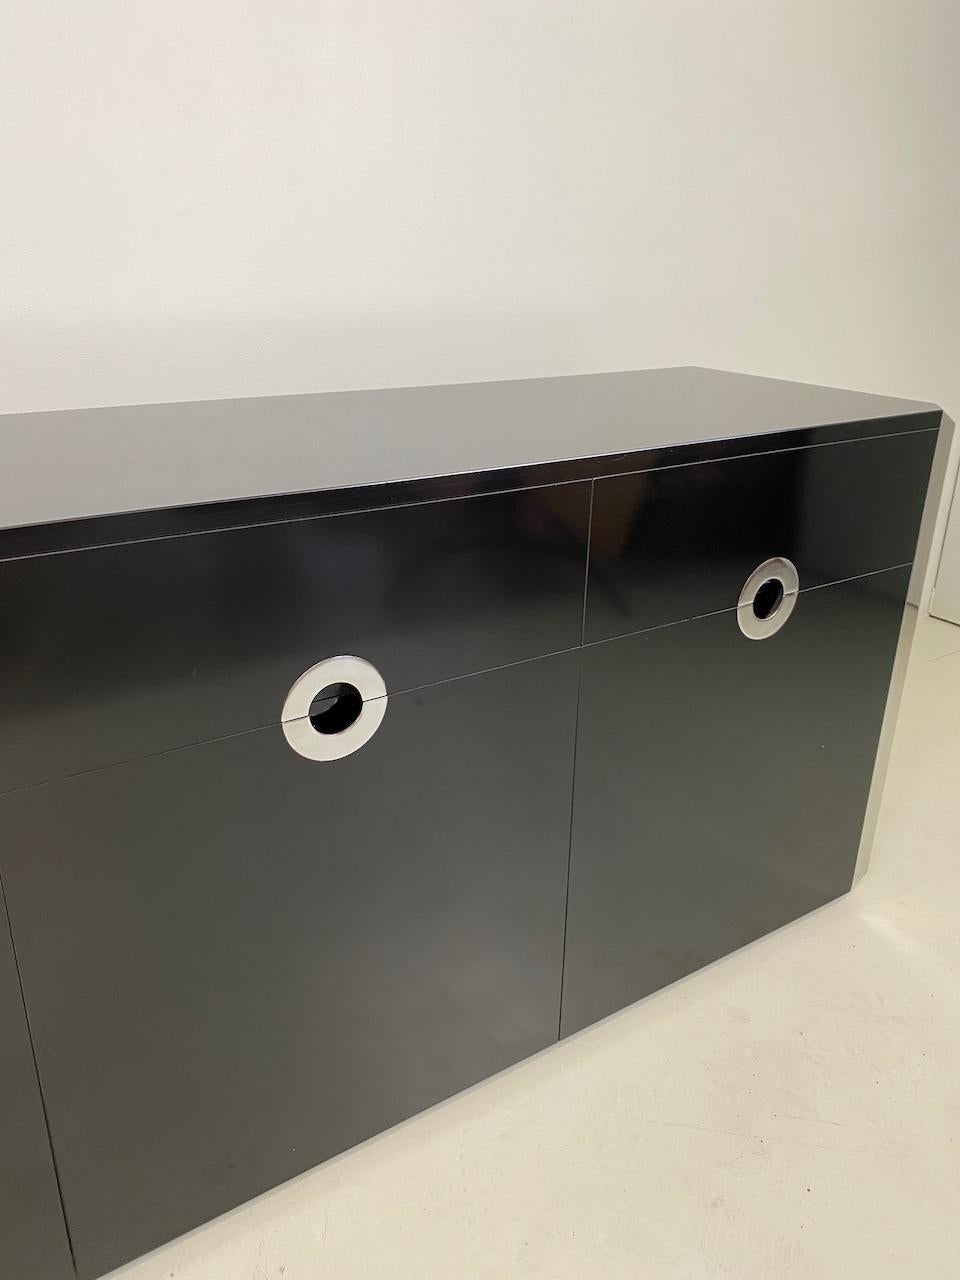 20th Century Black and Chrome Sideboard by Willy Rizzo for Mario Sabot, Italy, 1972